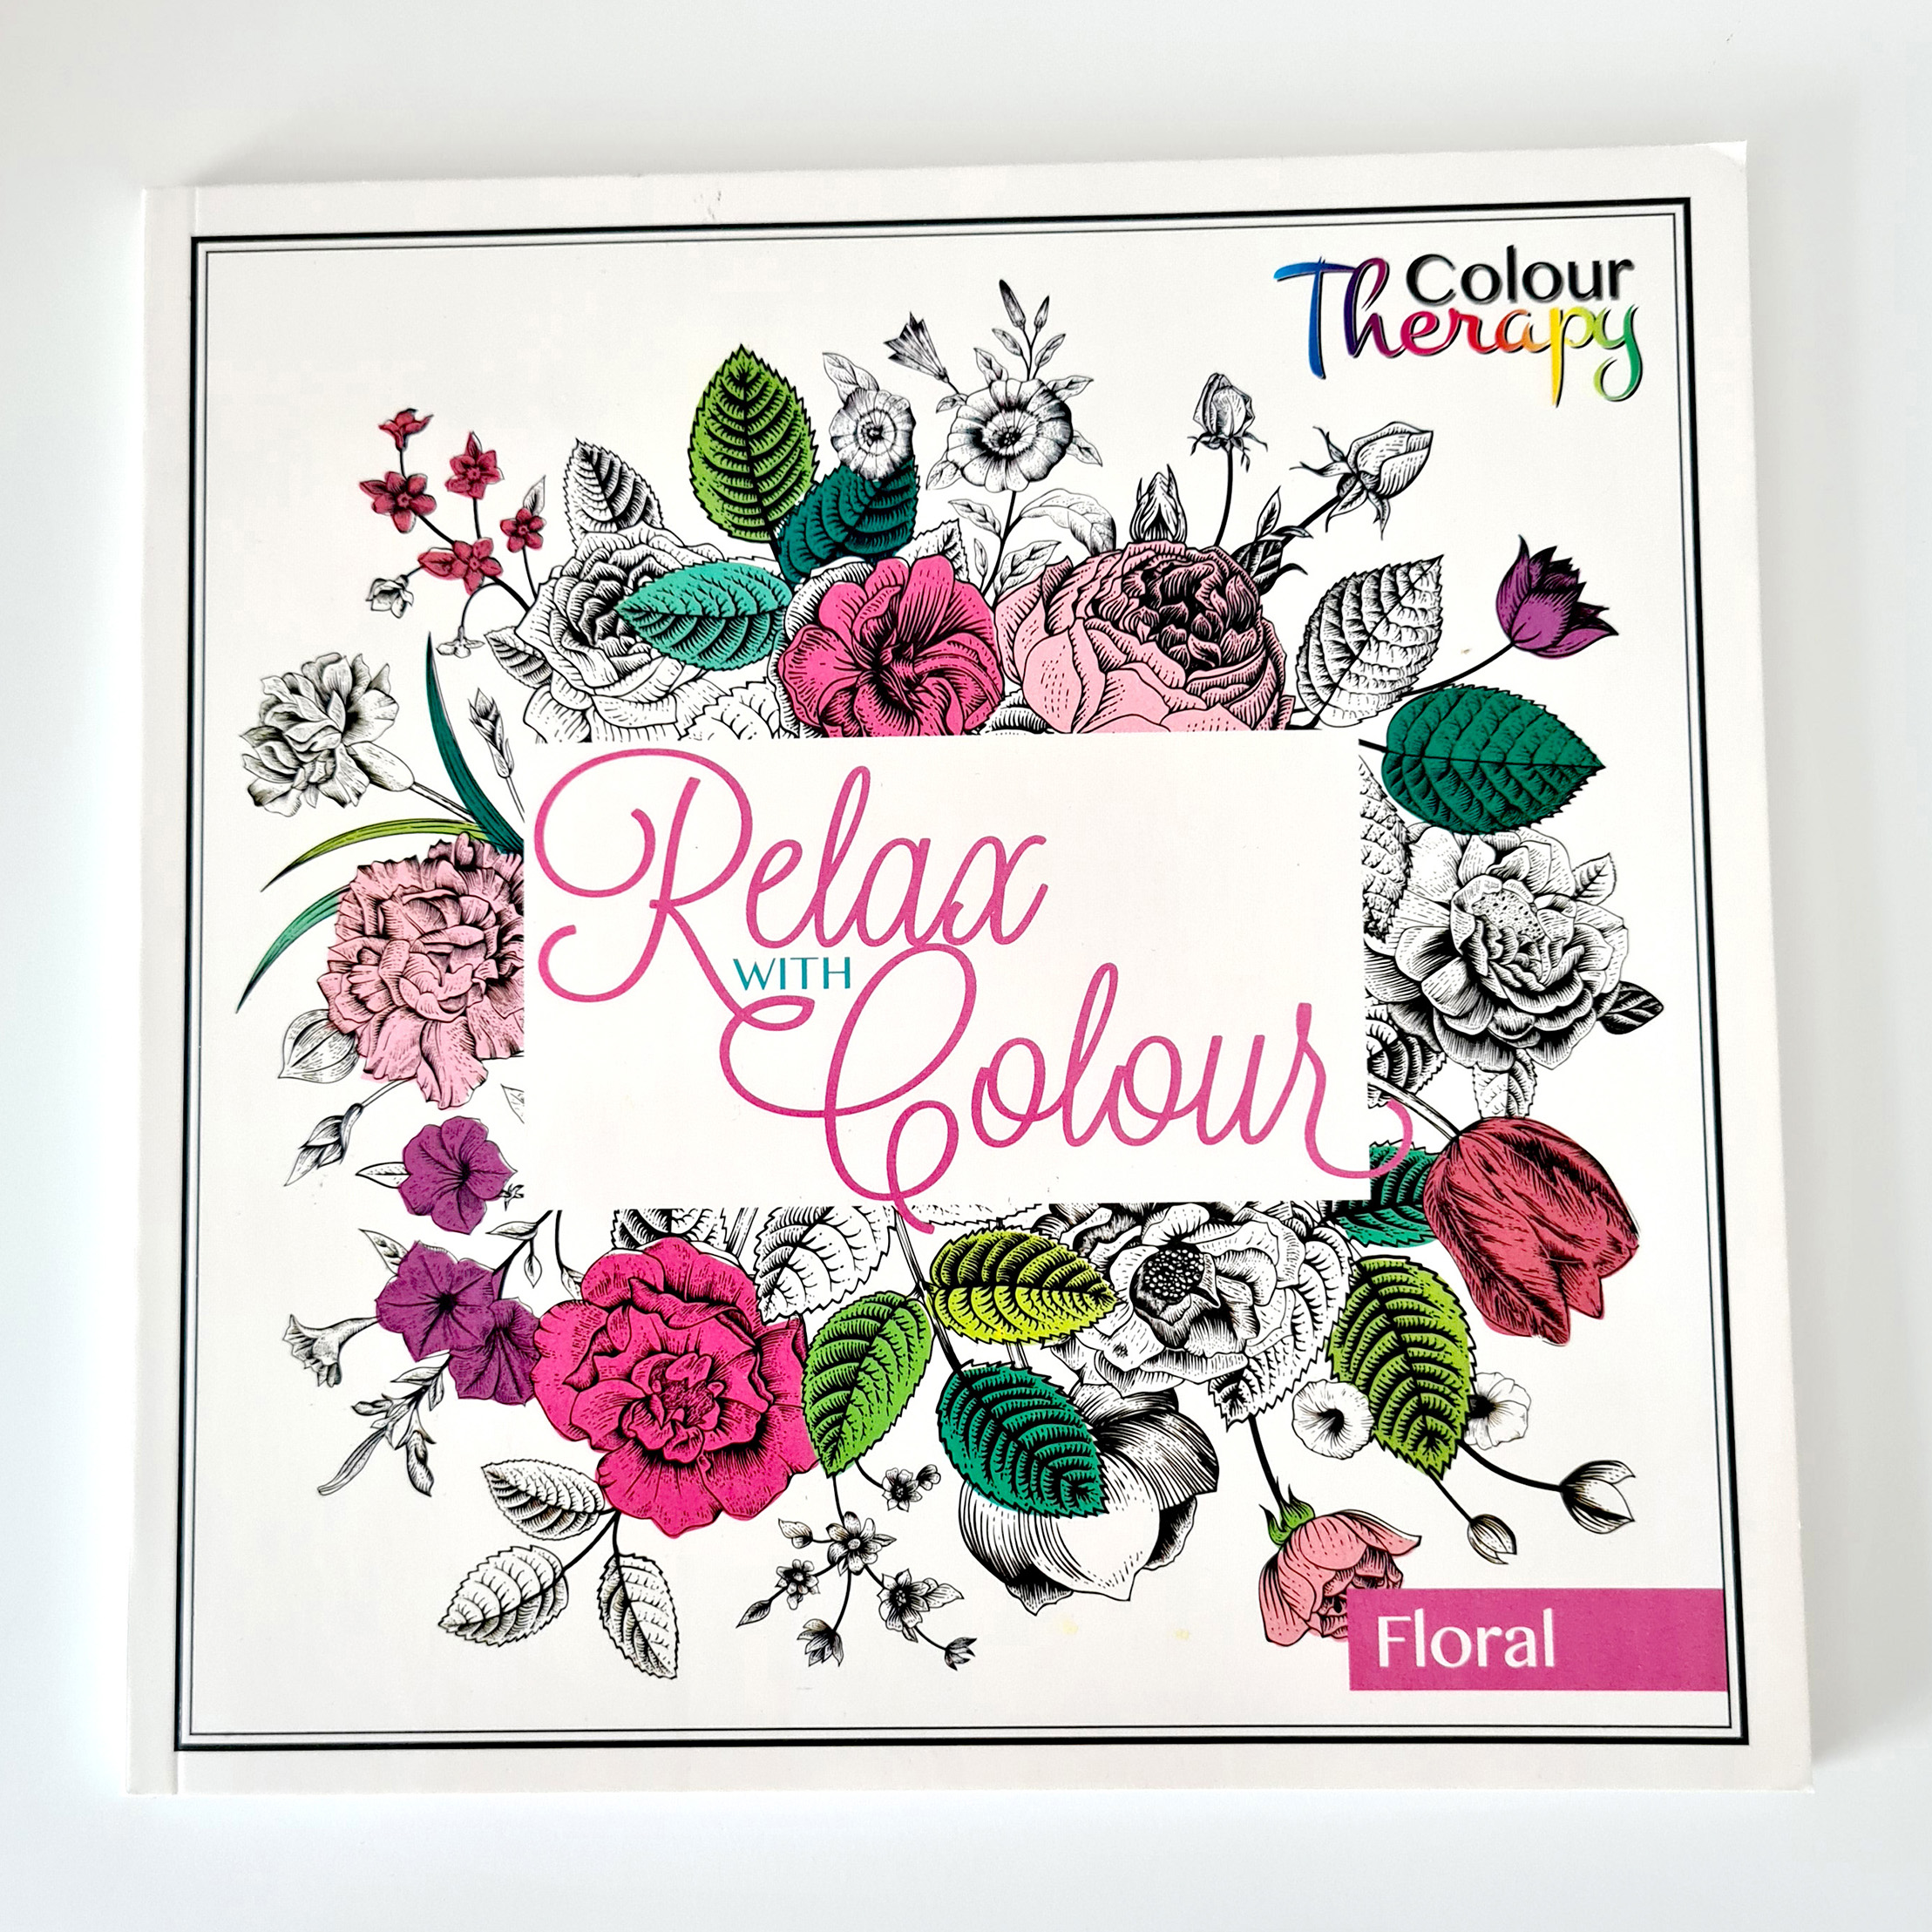 Floral colouring book for adults